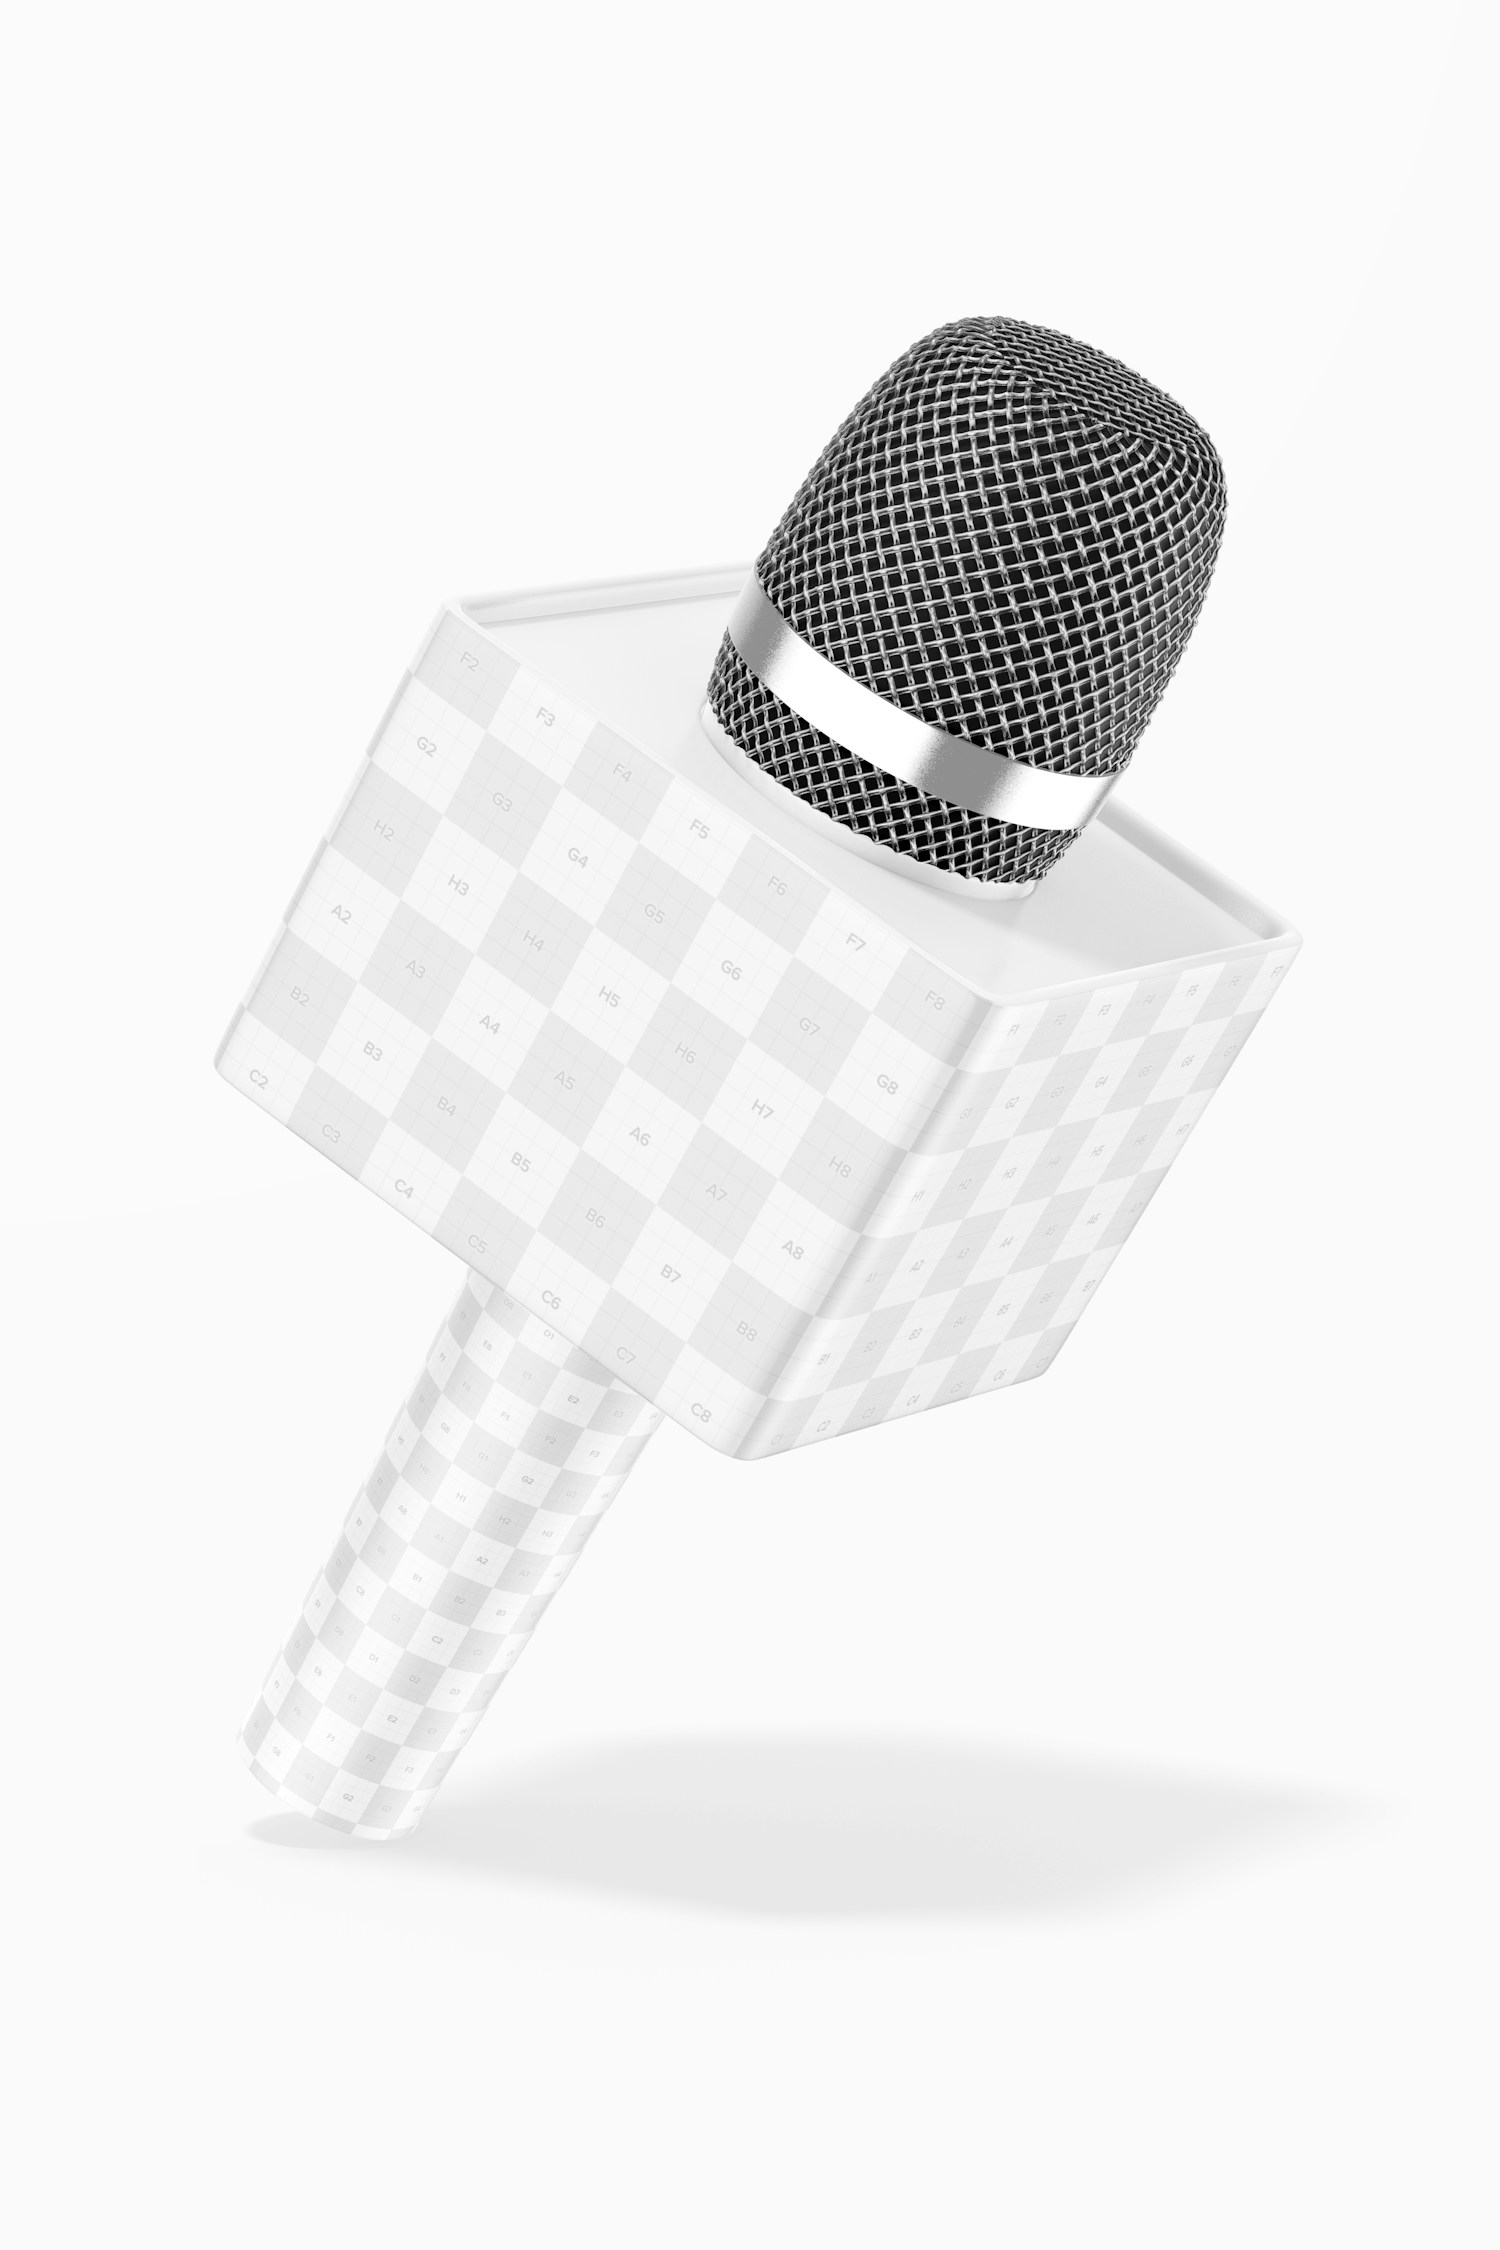 Handheld Microphone with Cube Mockup, Falling